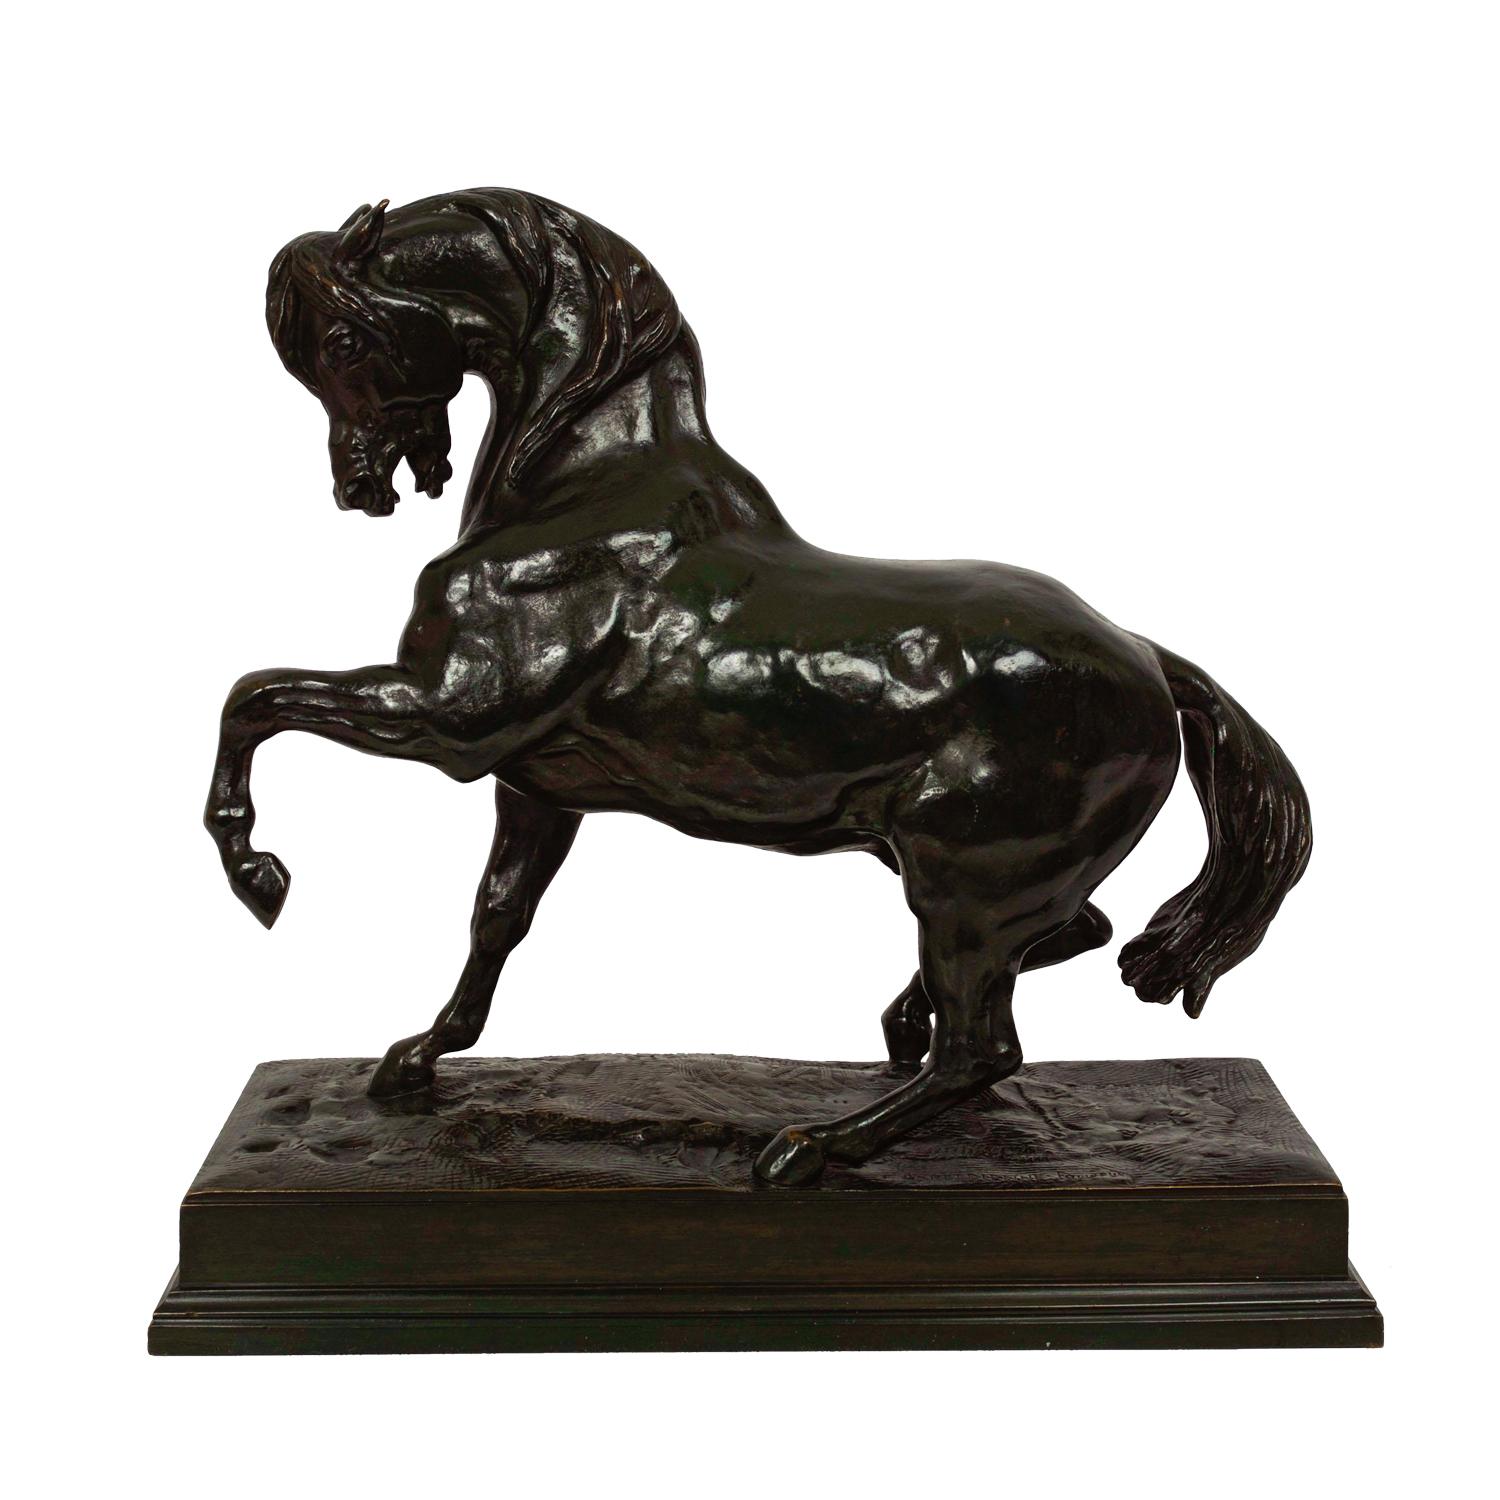 French Bronze Sculpture "Cheval Turc no. 2" after Antoine-Louis Barye